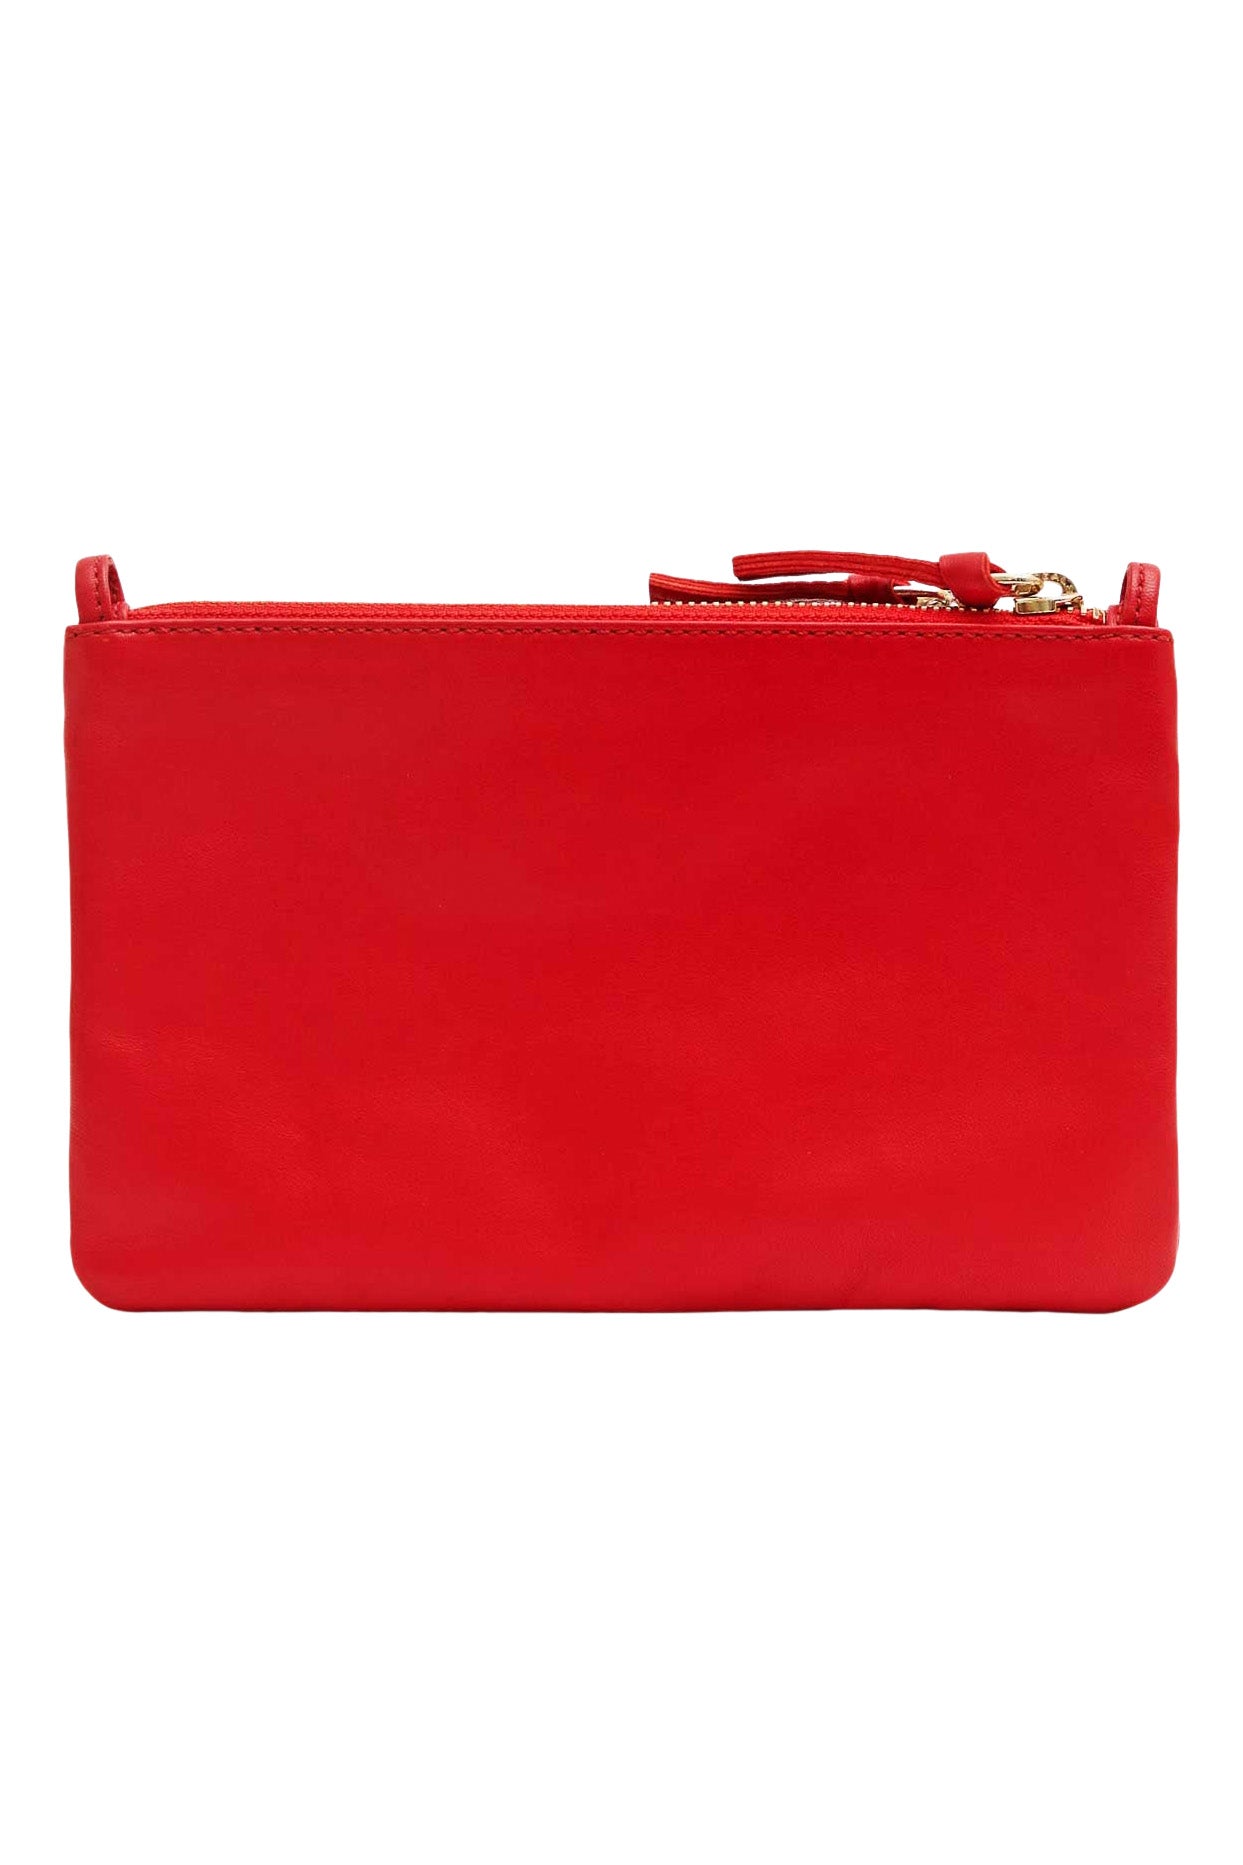 Clare V. Wallet Clutch Plus in Rouge